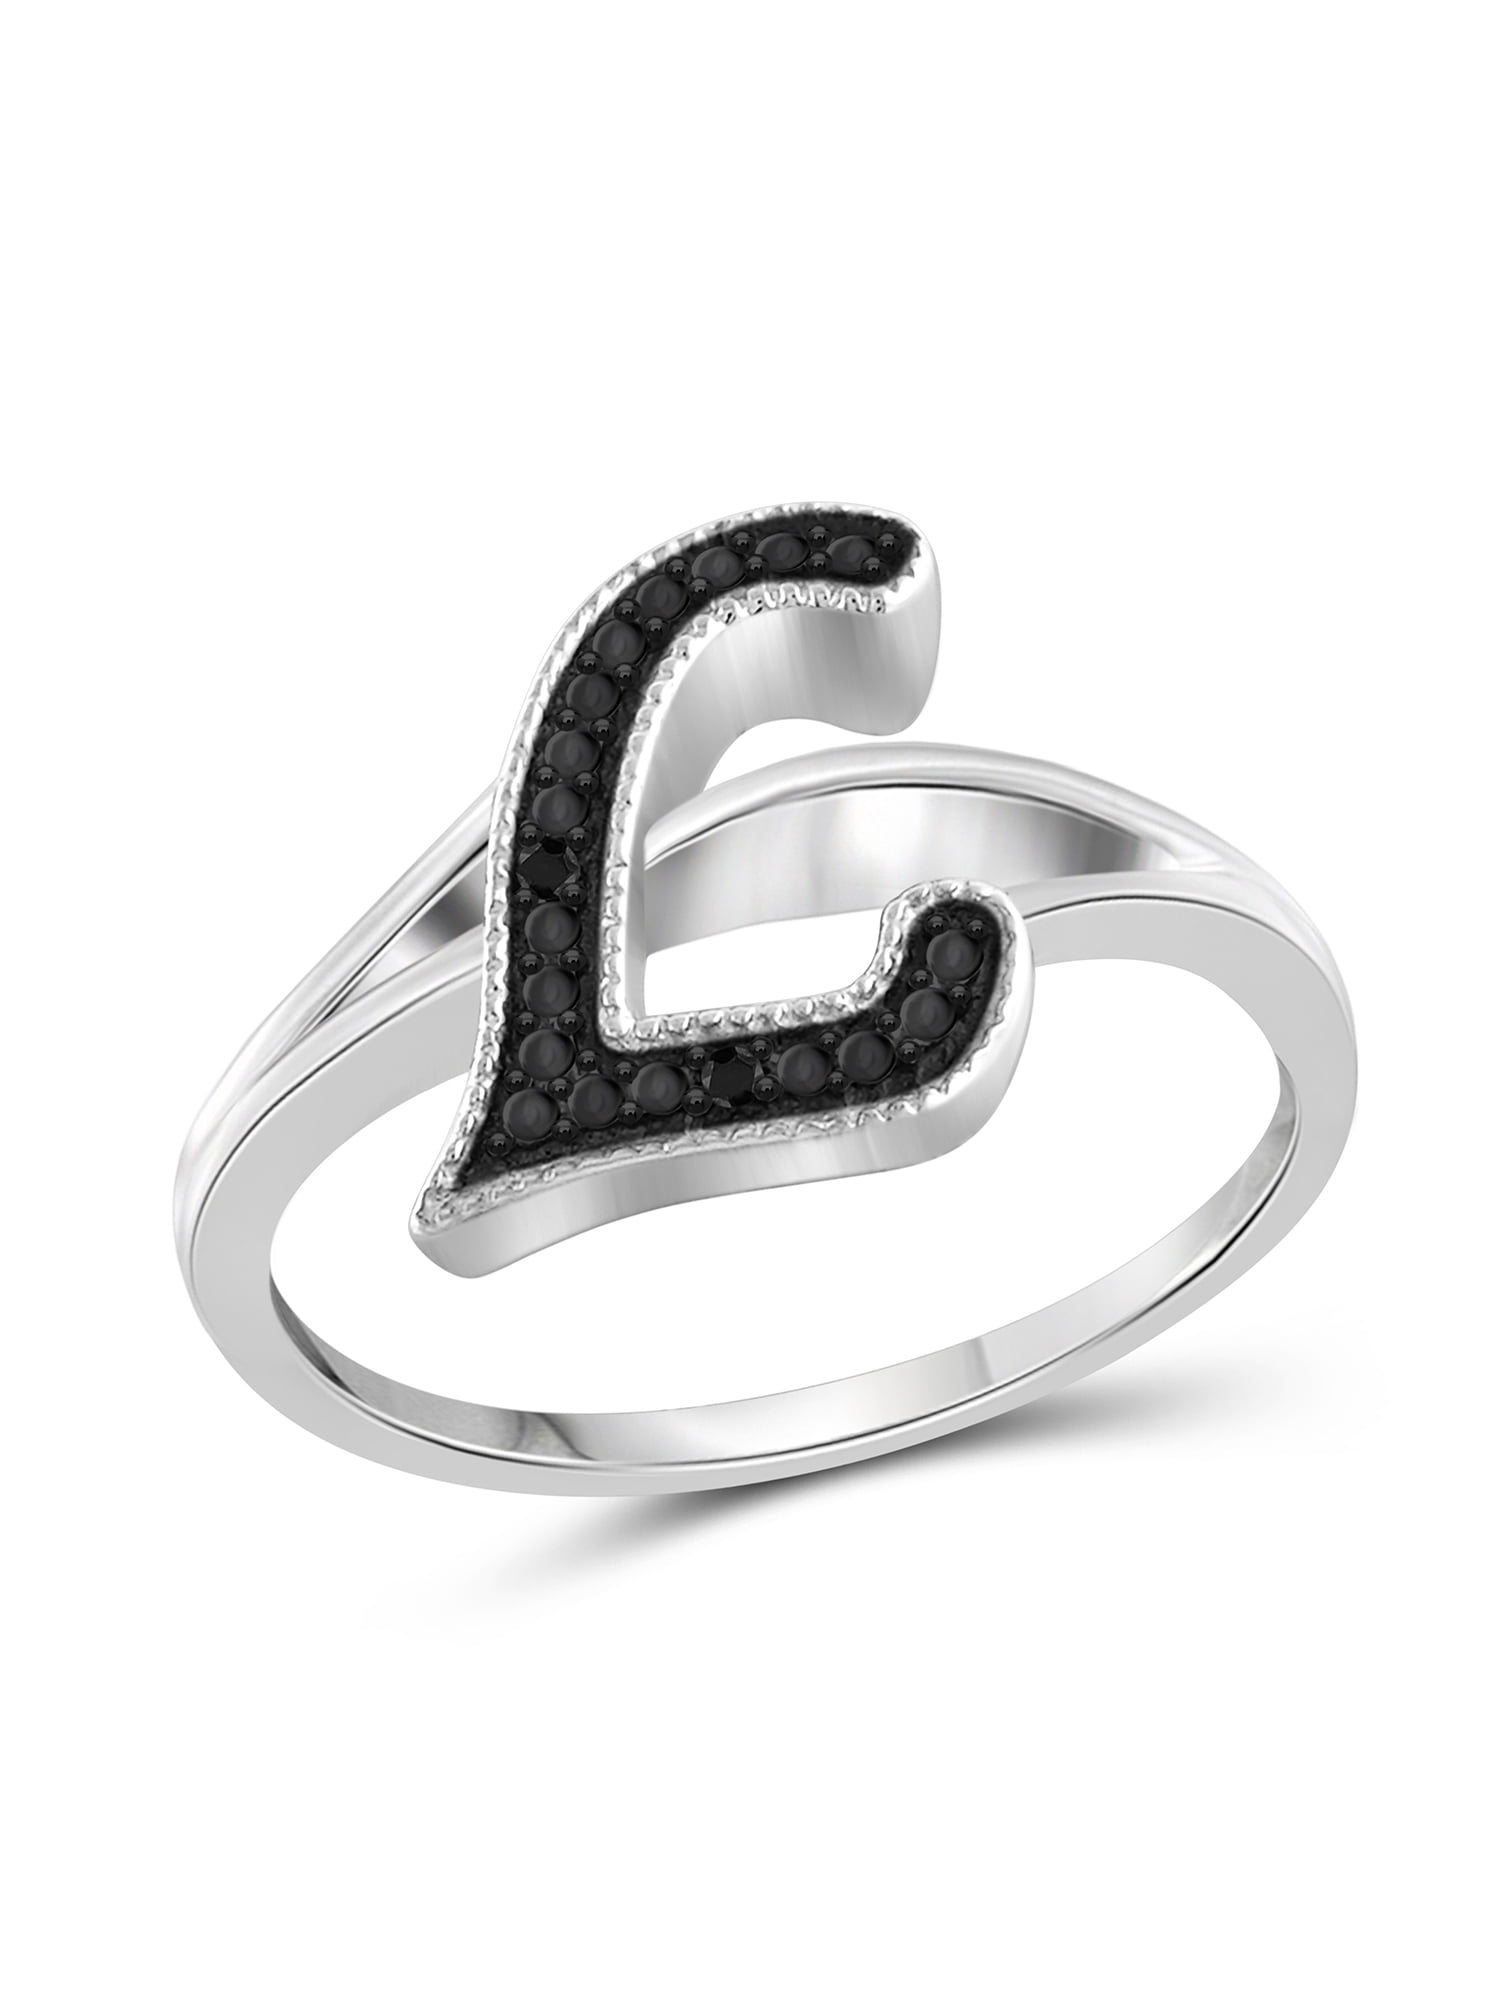 Jewelersclub Accent White Diamond Initial Letter Ring for Women | Customizable Sterling Silver N Alphabet Monogram Ring for Girls | Cursive Script